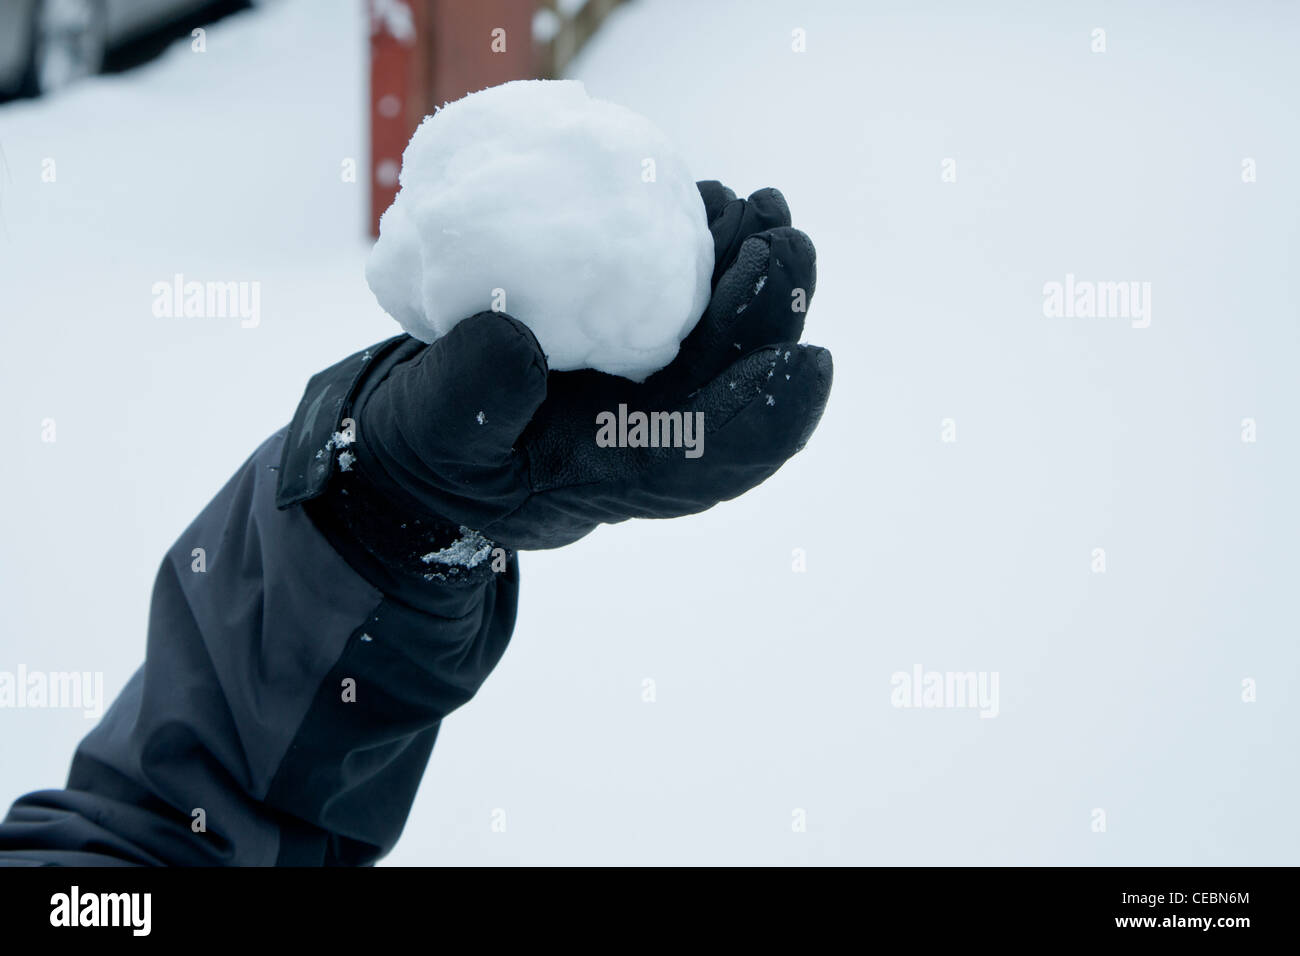 A child's gloved hand holds a snowball ready to throw it Stock Photo